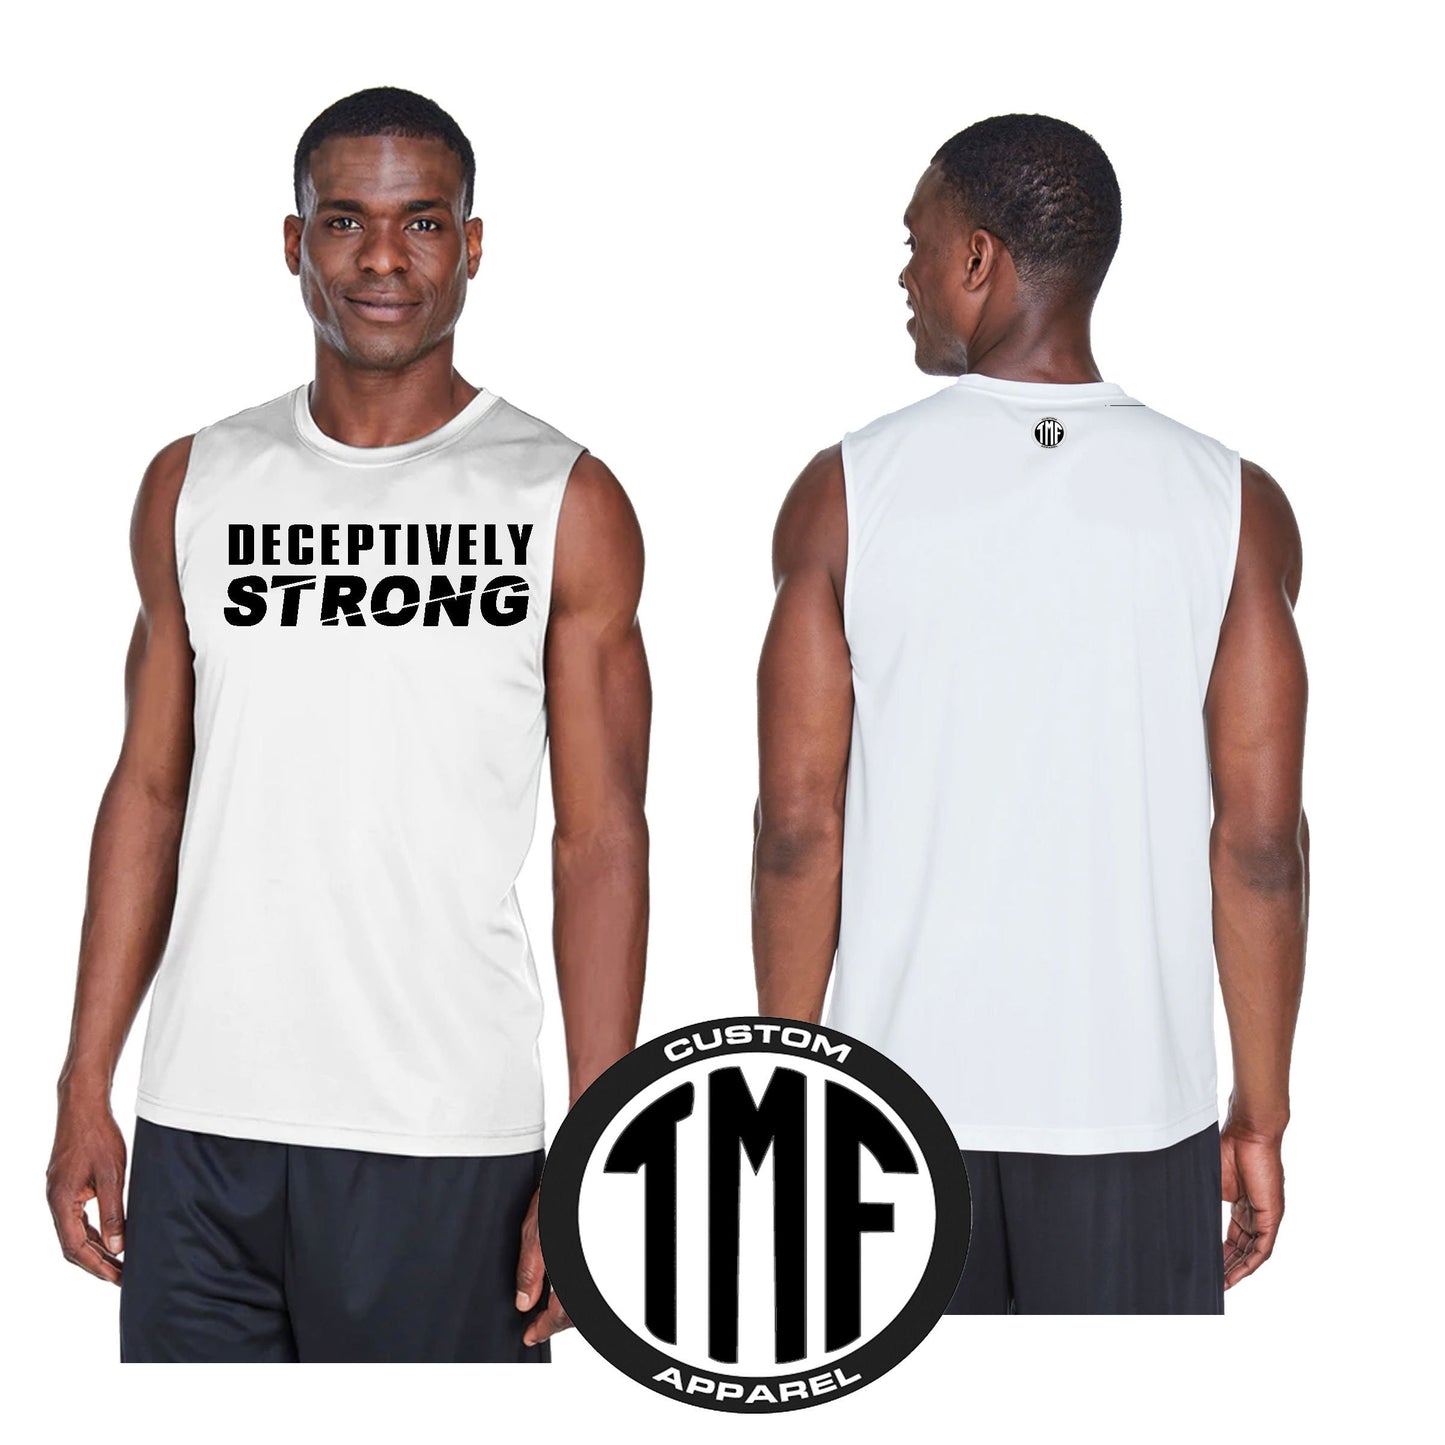 DECEPTIVELY STRONG - Mens Gym Tank